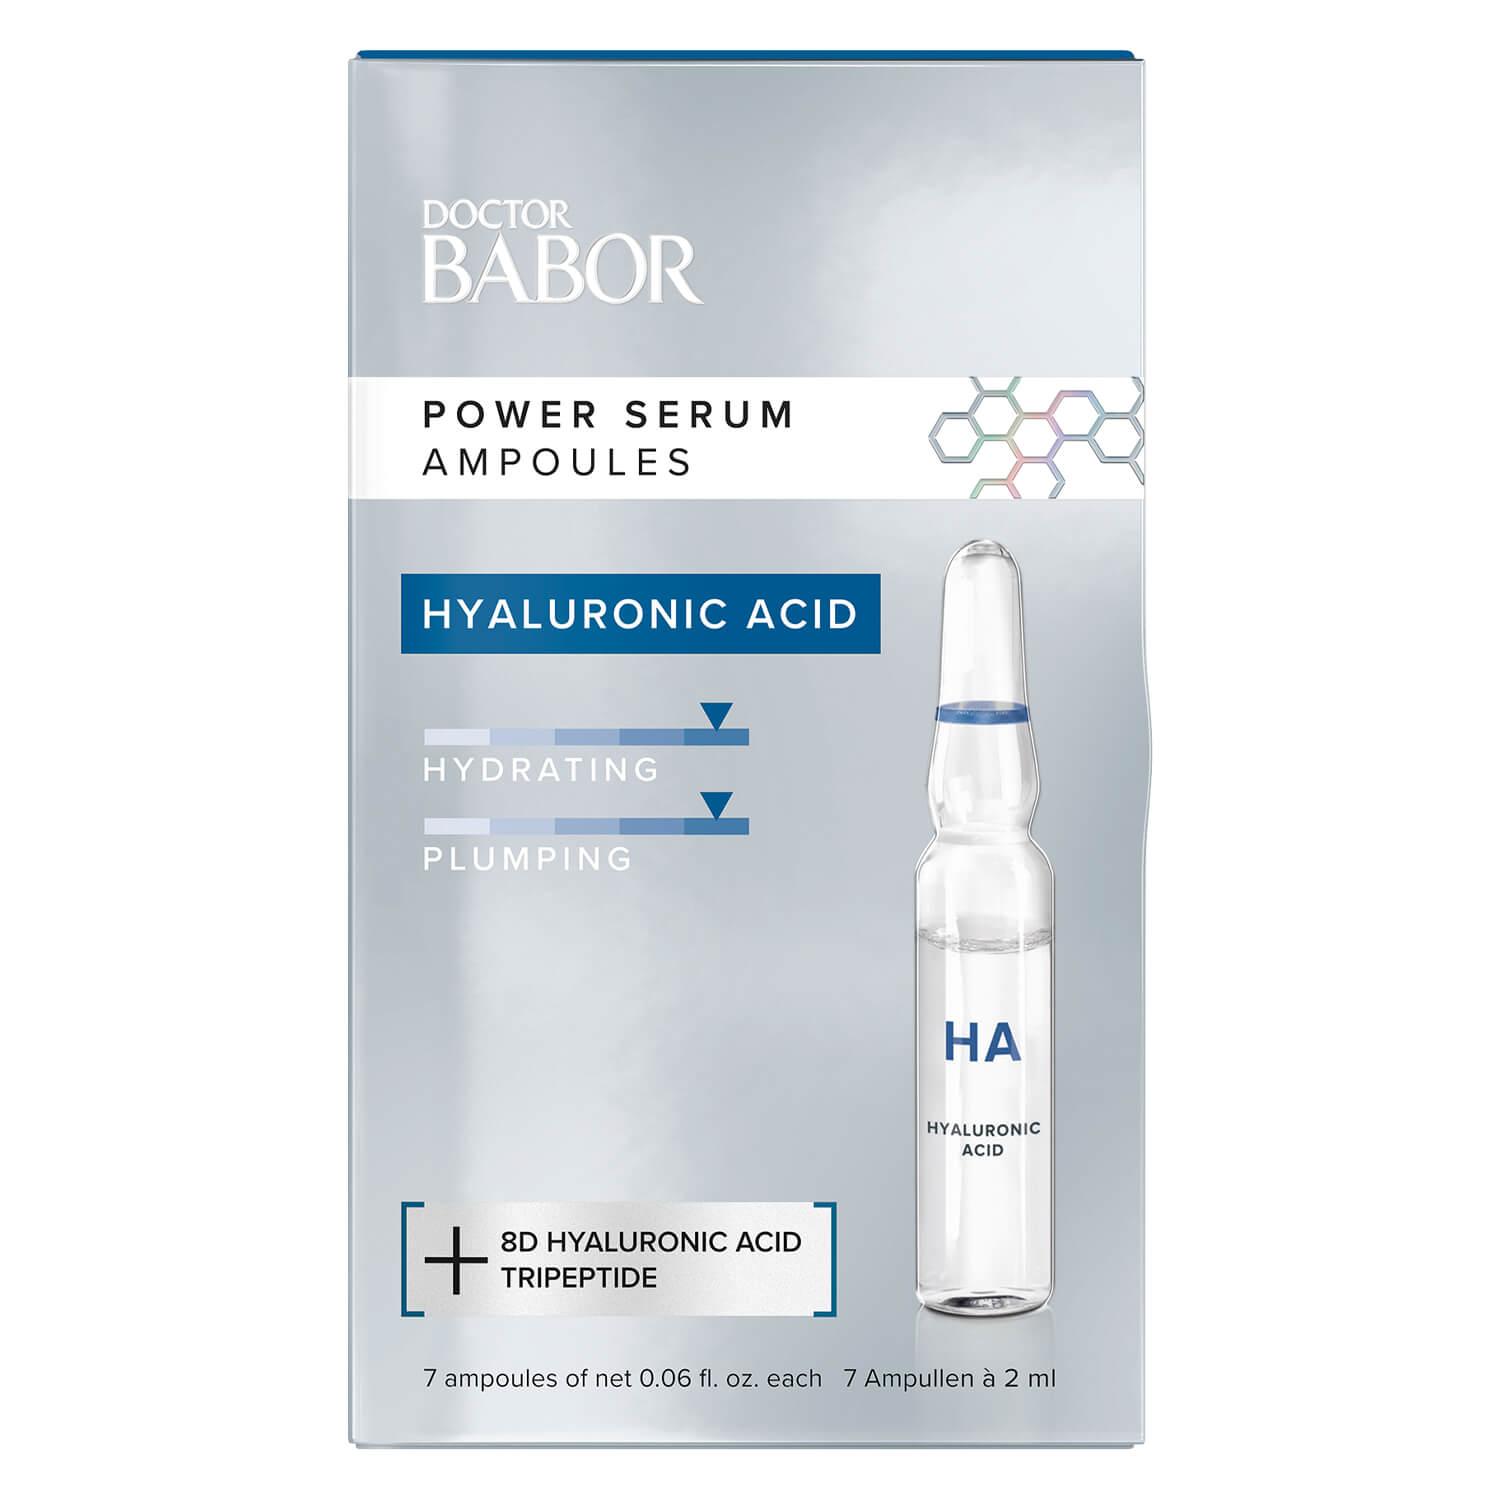 DOCTOR BABOR - Power Serum Ampoules Hyaluronic Acid